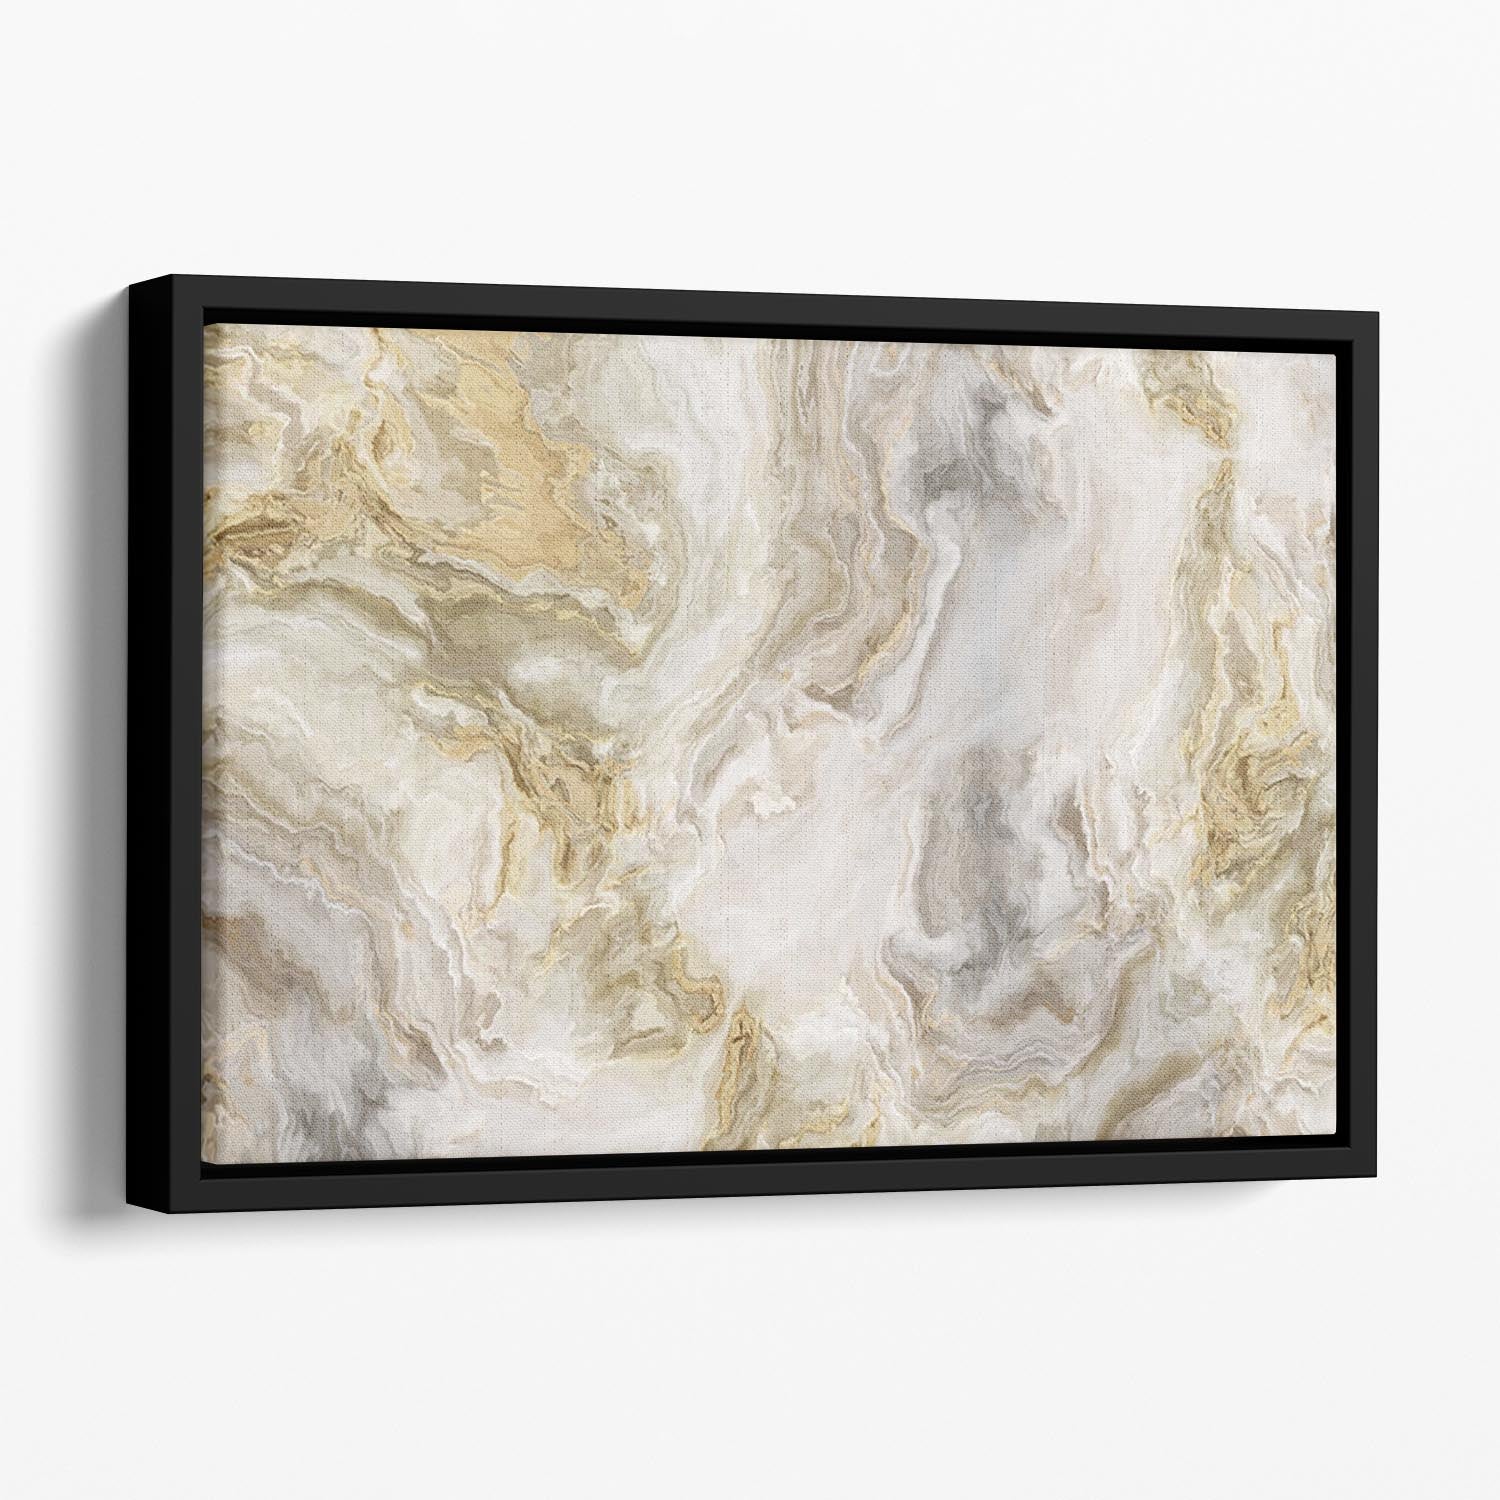 Swirled White Grey and Gold Marble Floating Framed Canvas - Canvas Art Rocks - 1